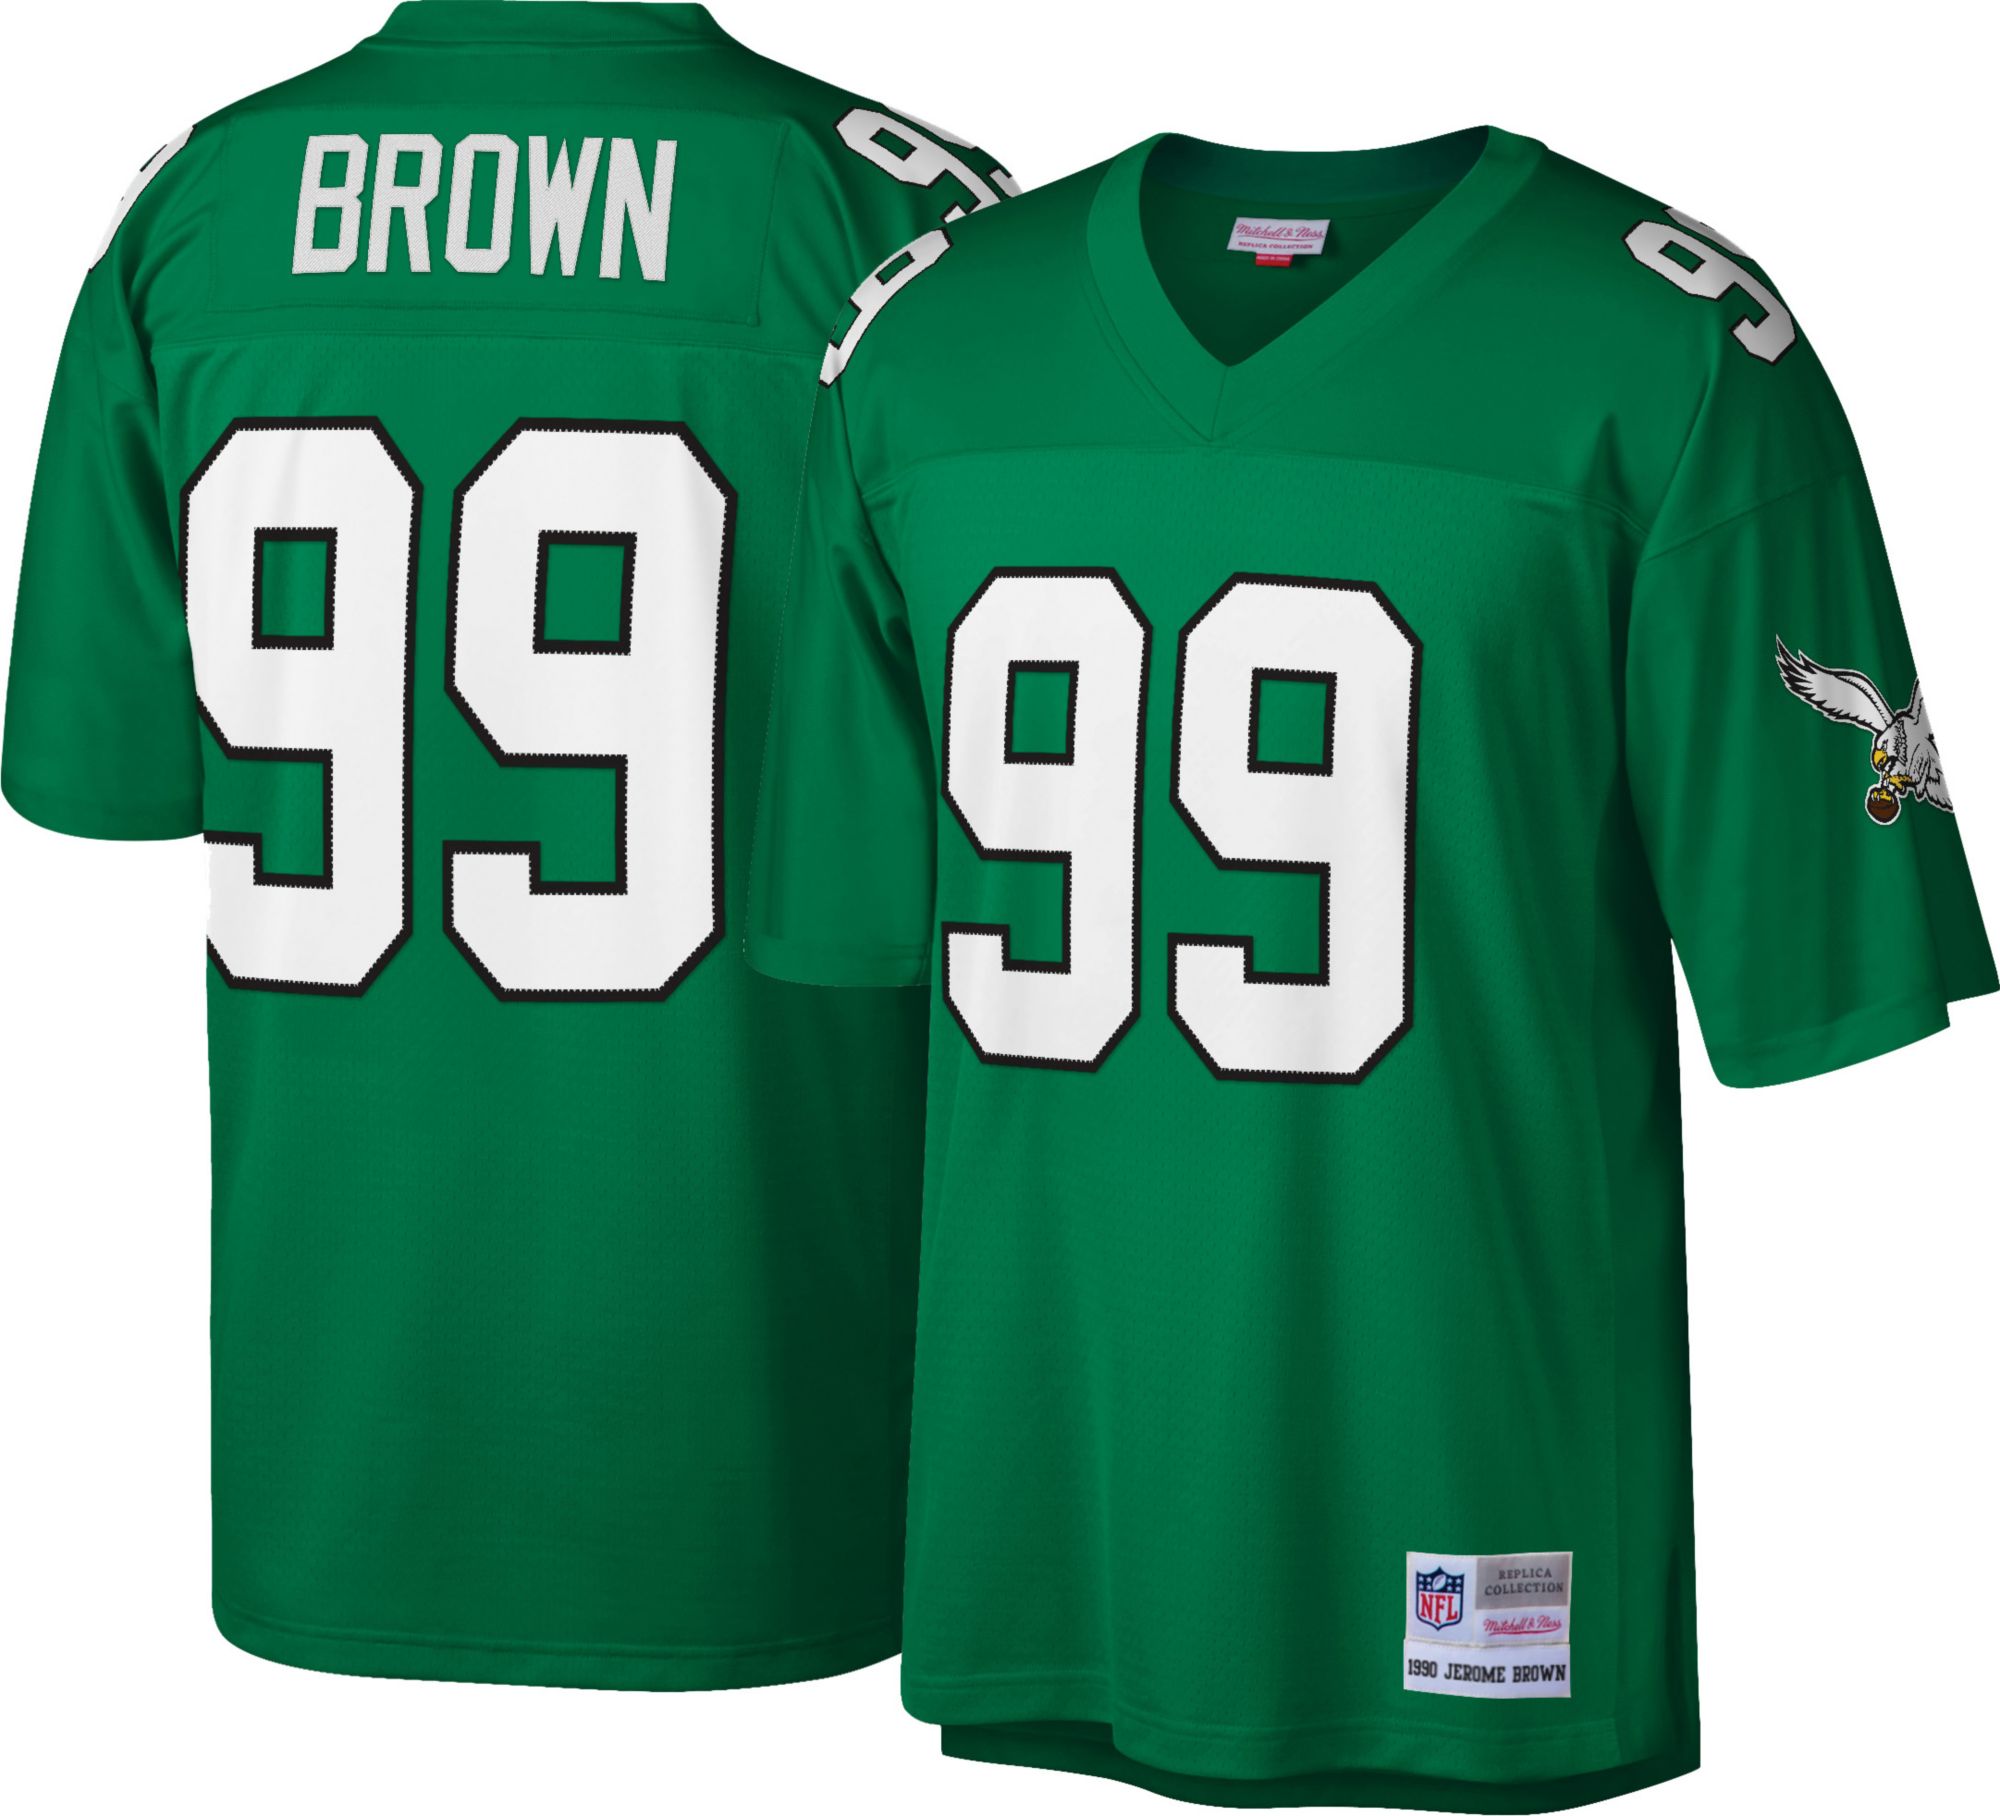 eagles 99 jersey